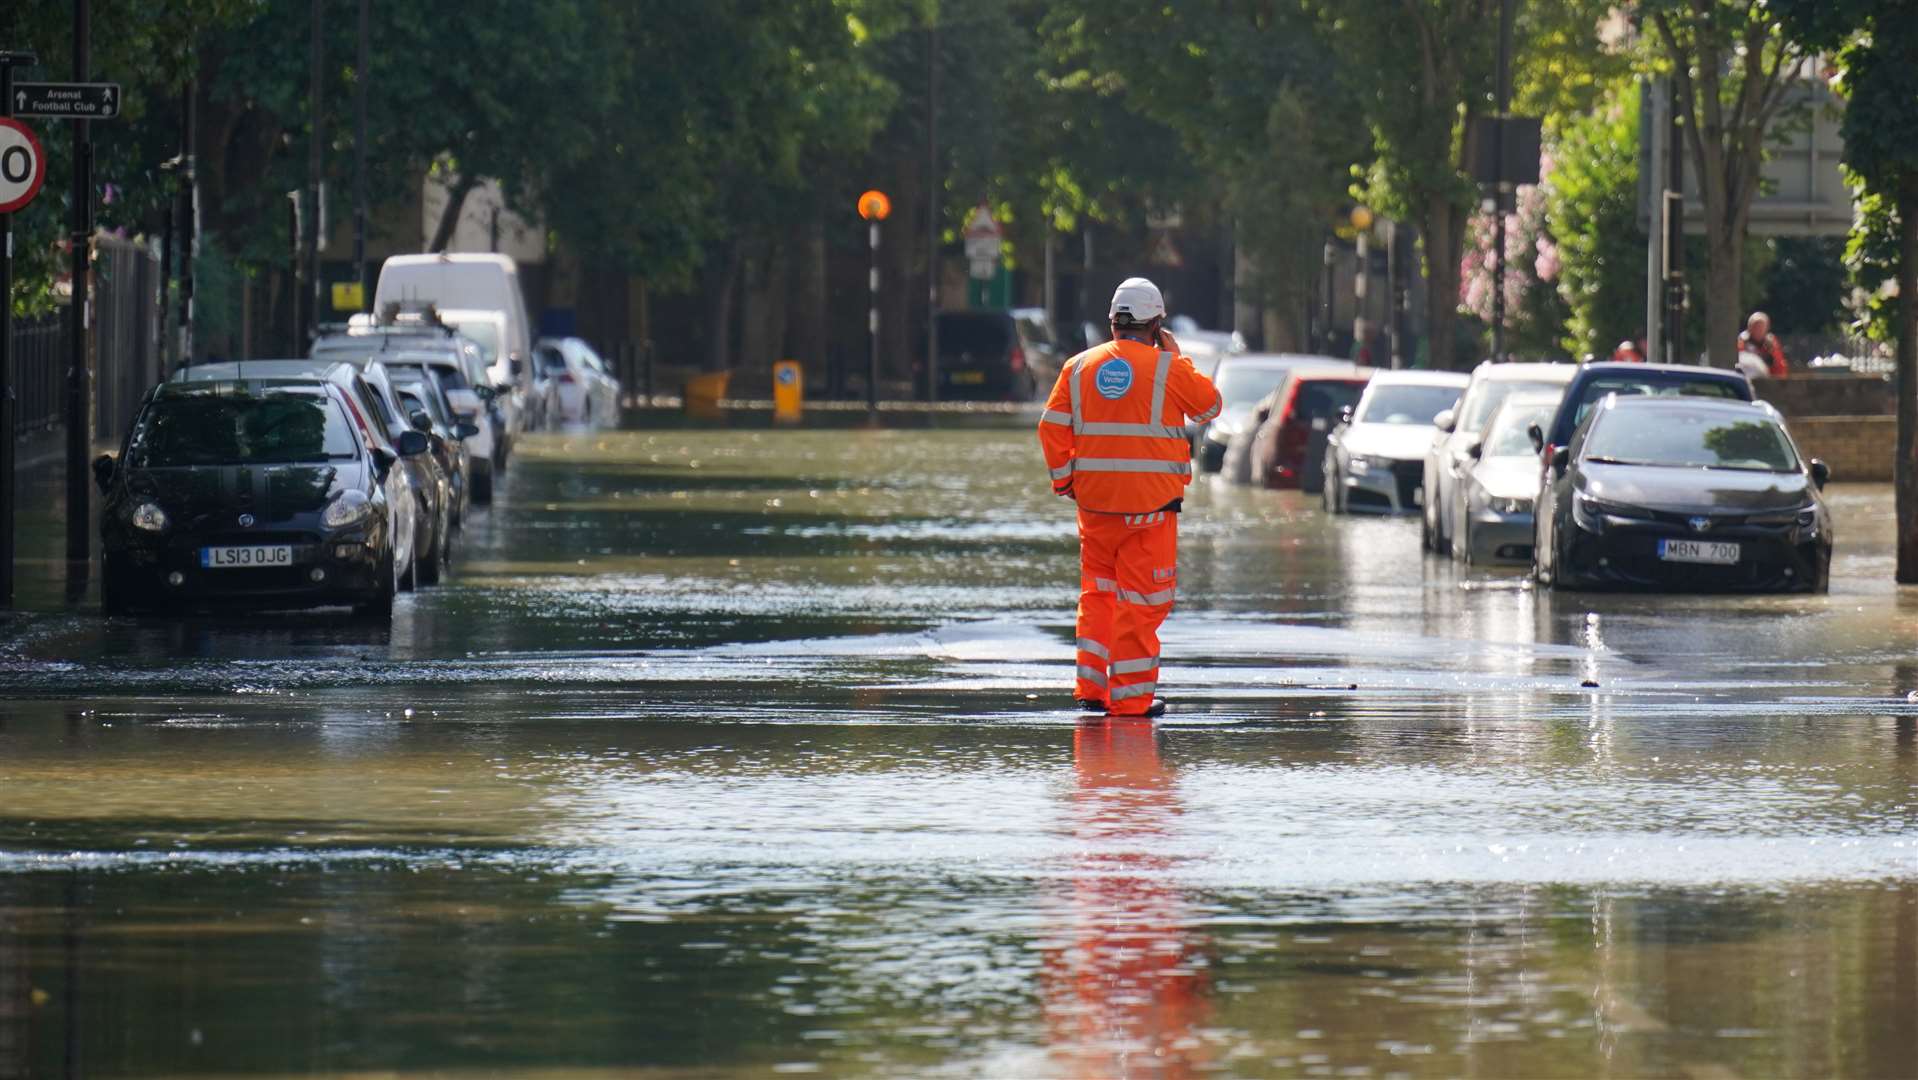 Thames Water failed to meet its target this year for sewer flooding, pollution and blockages (Jonathan Brady/PA)